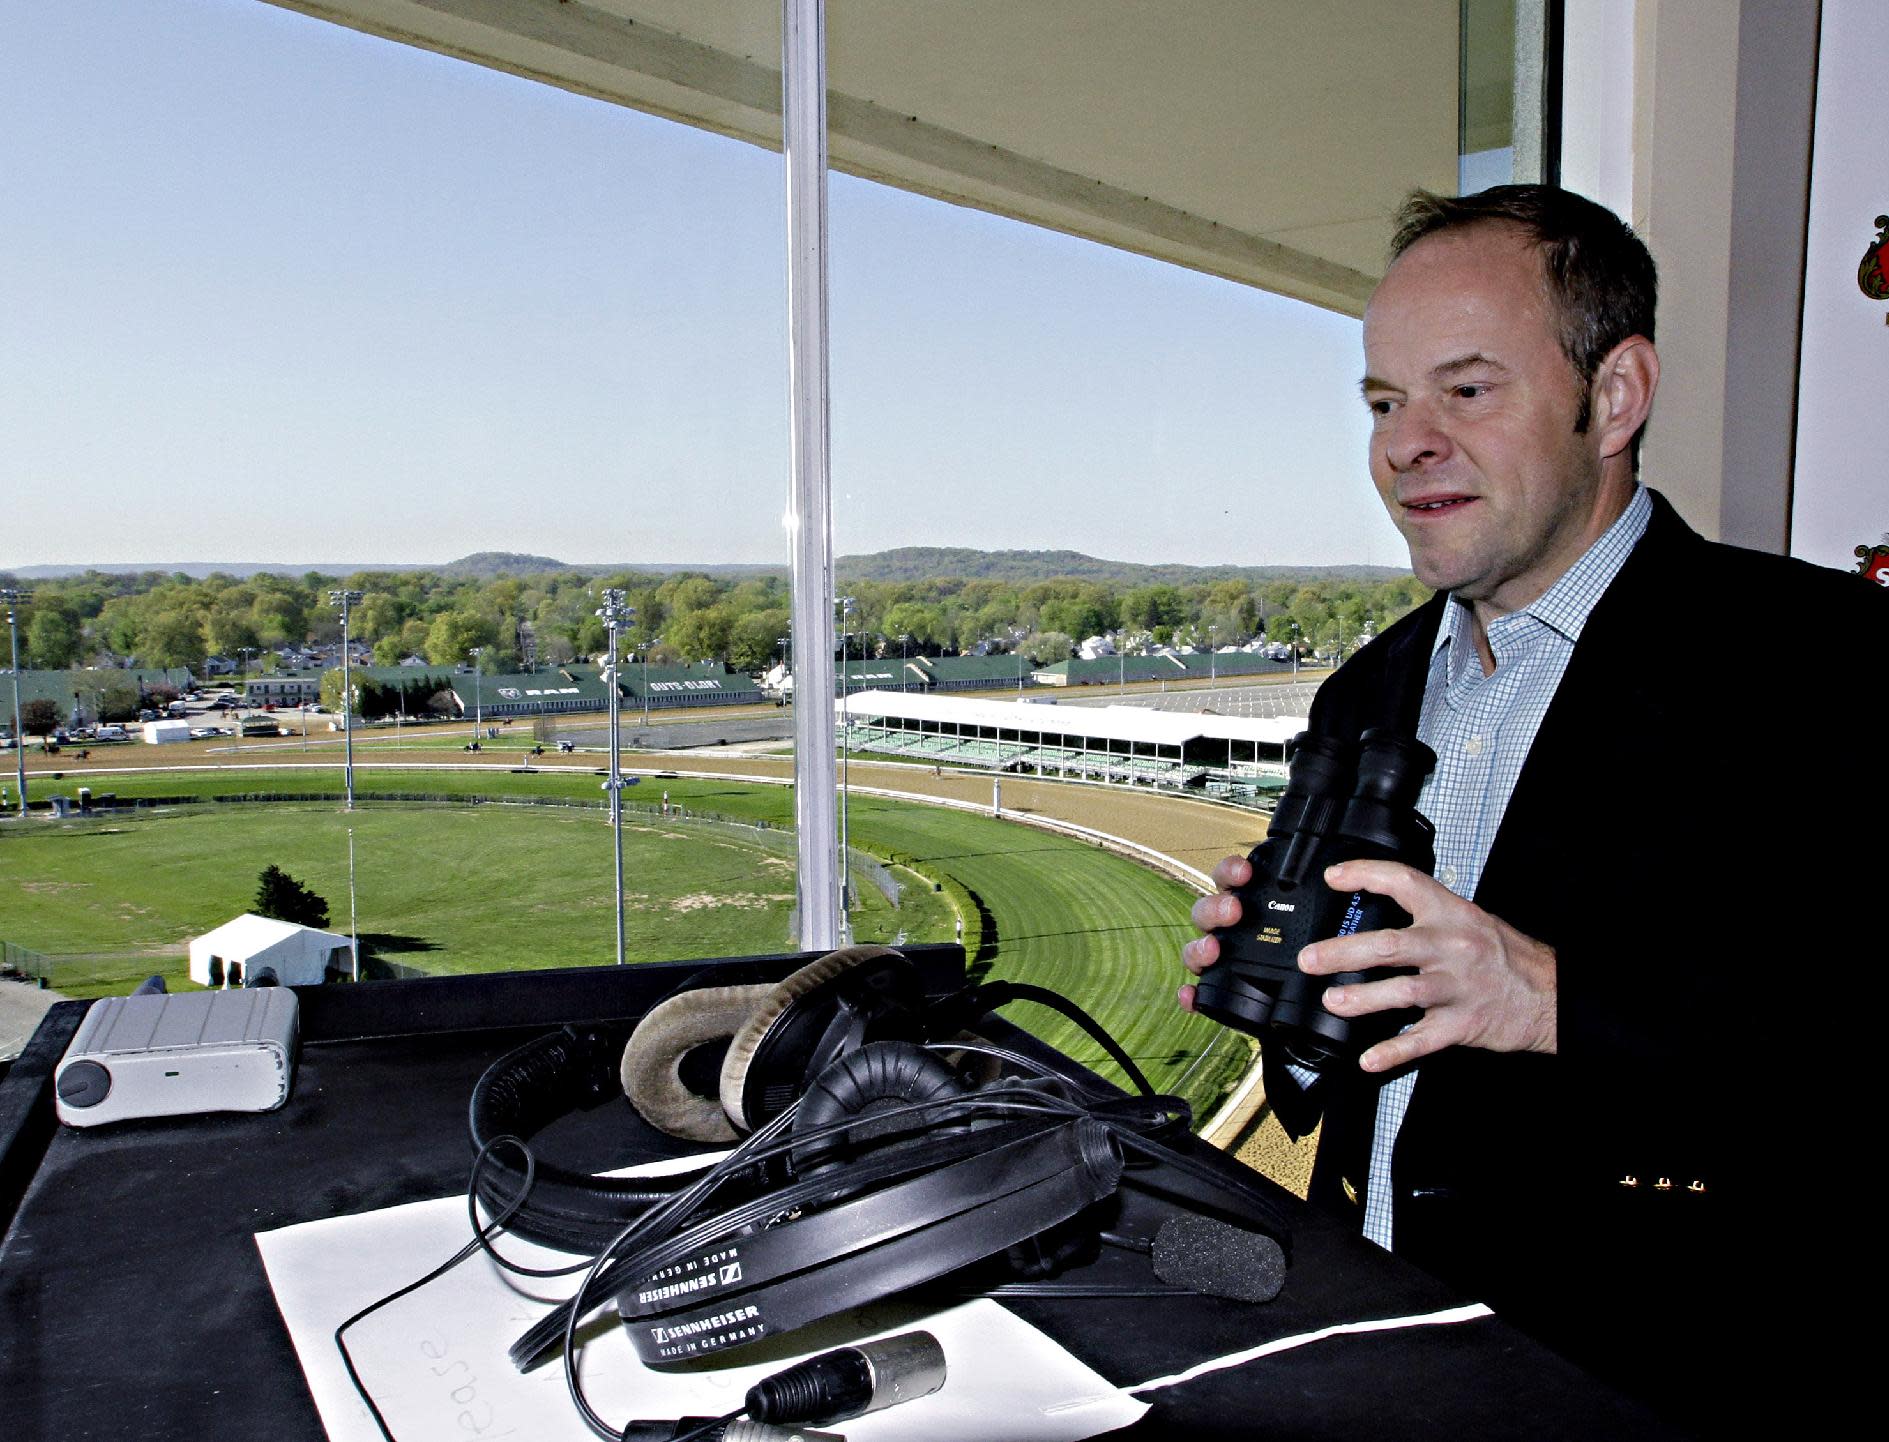 Announcer relishes role as voice of Kentucky Derby